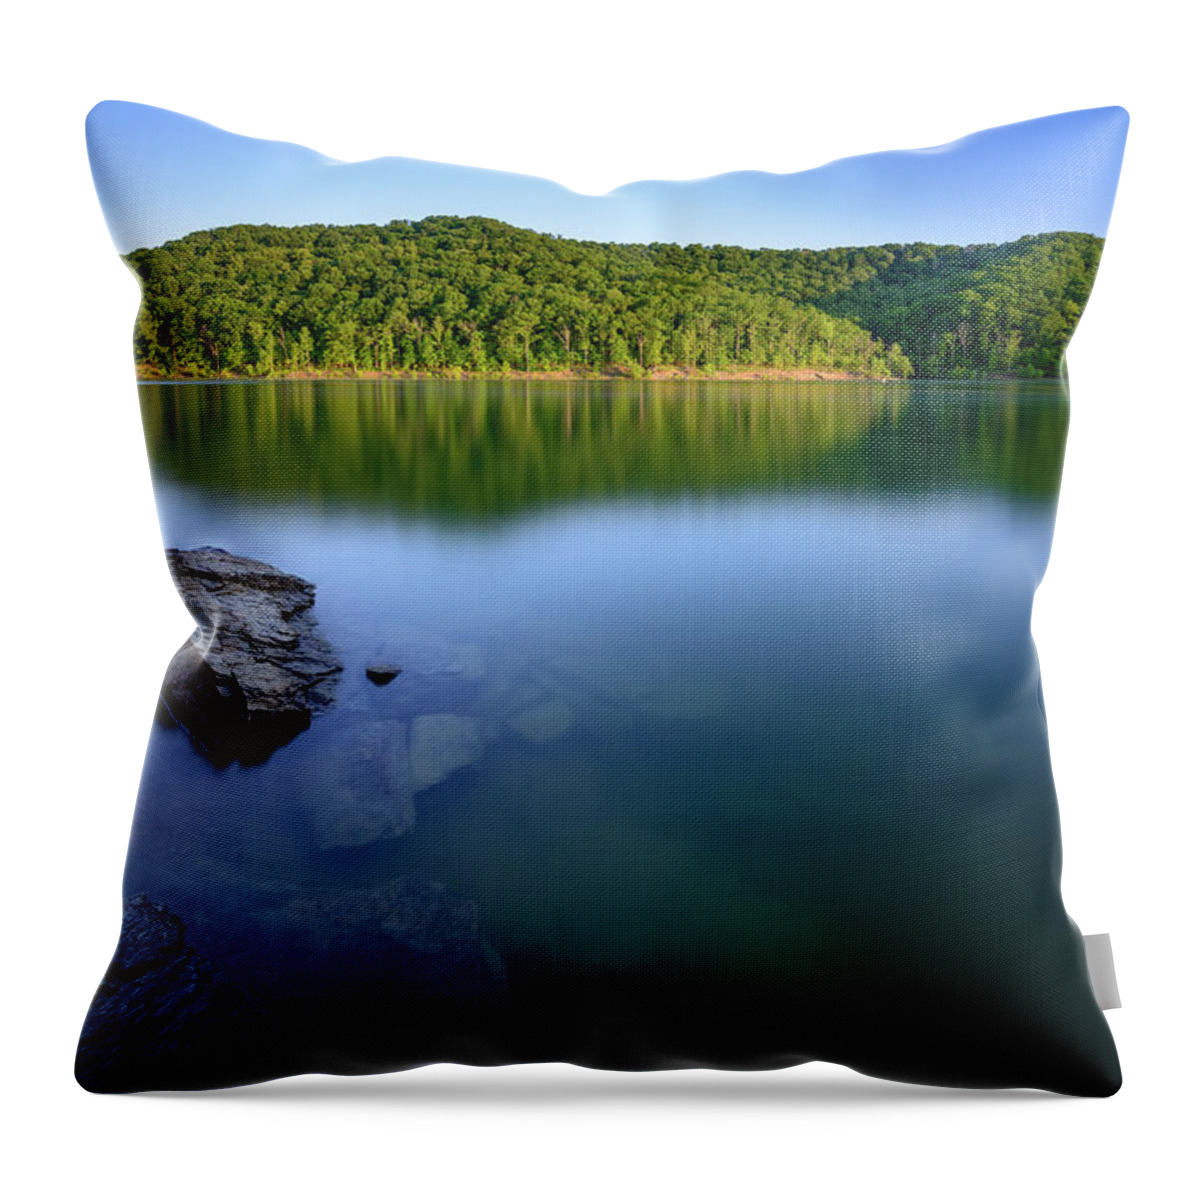 East Throw Pillow featuring the photograph Reflections Of Tranquility by Michael Scott